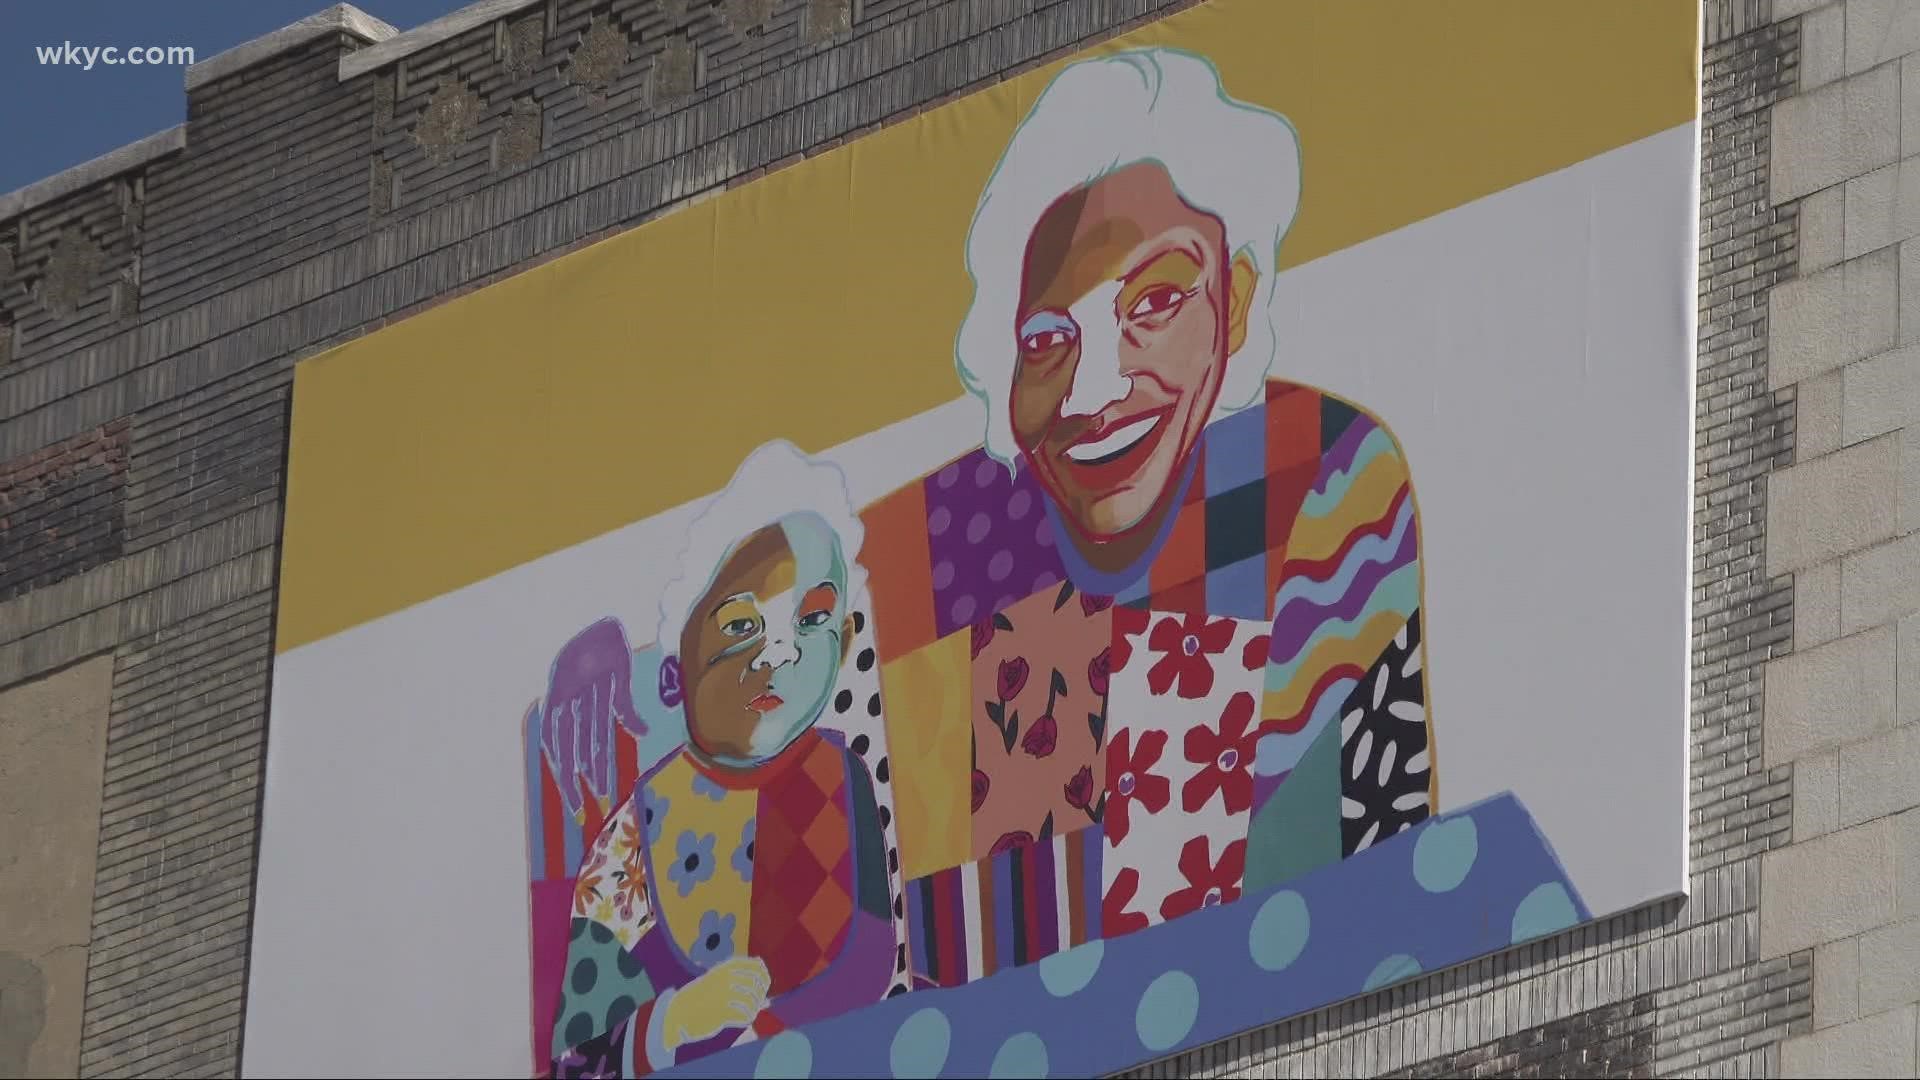 Coming off the heels of an amazing game against the Bears, Myles Garrett payed homage to his grandma today with a mural in downtown.